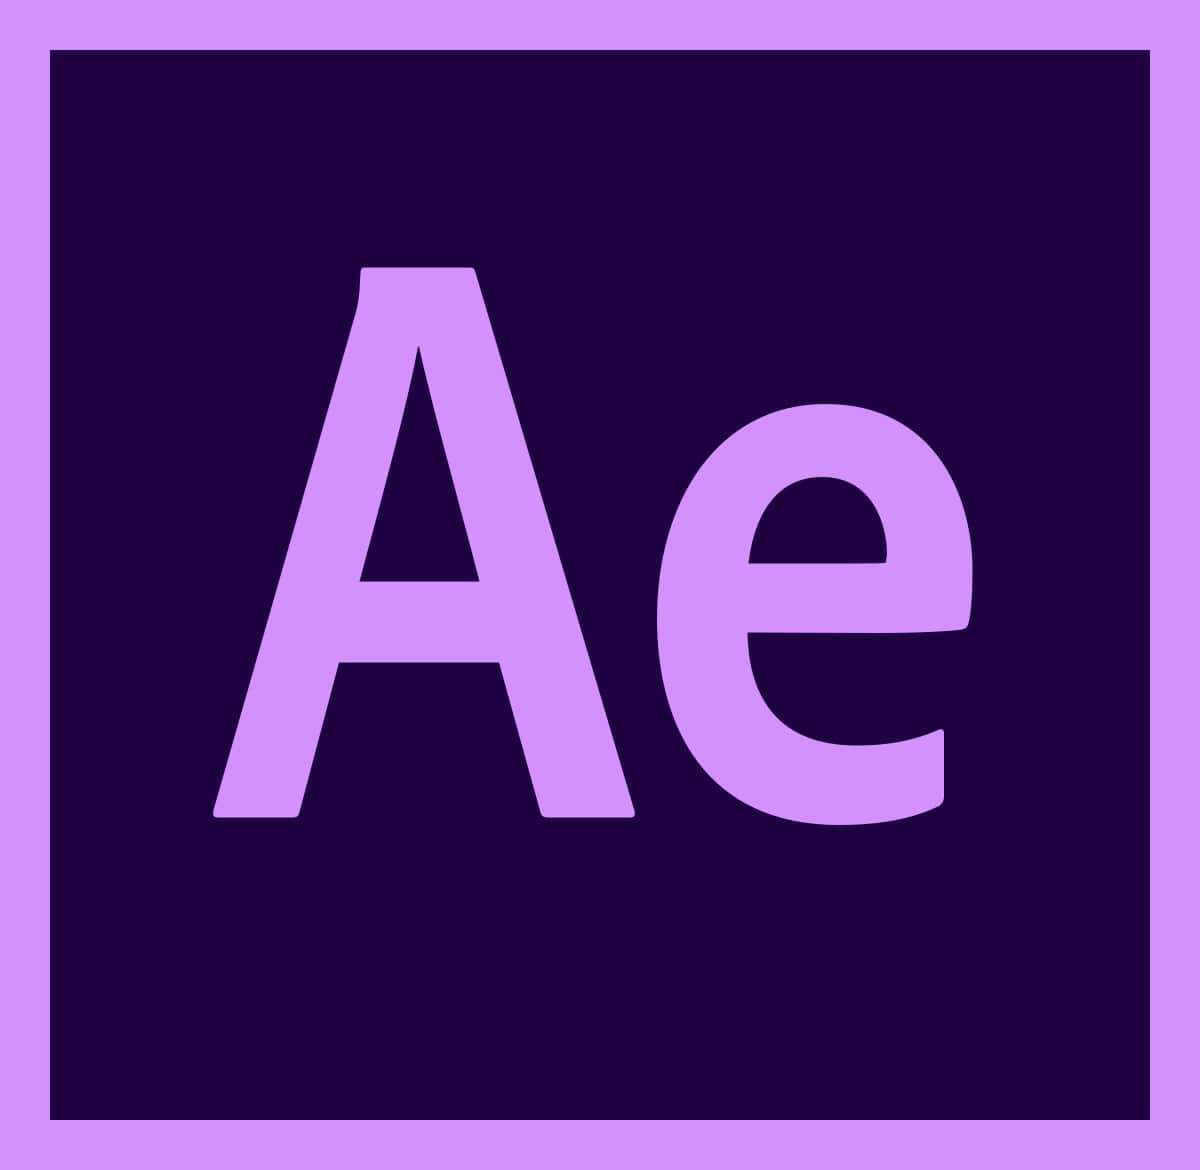 03_BTS_Software used_Adobe After Effects